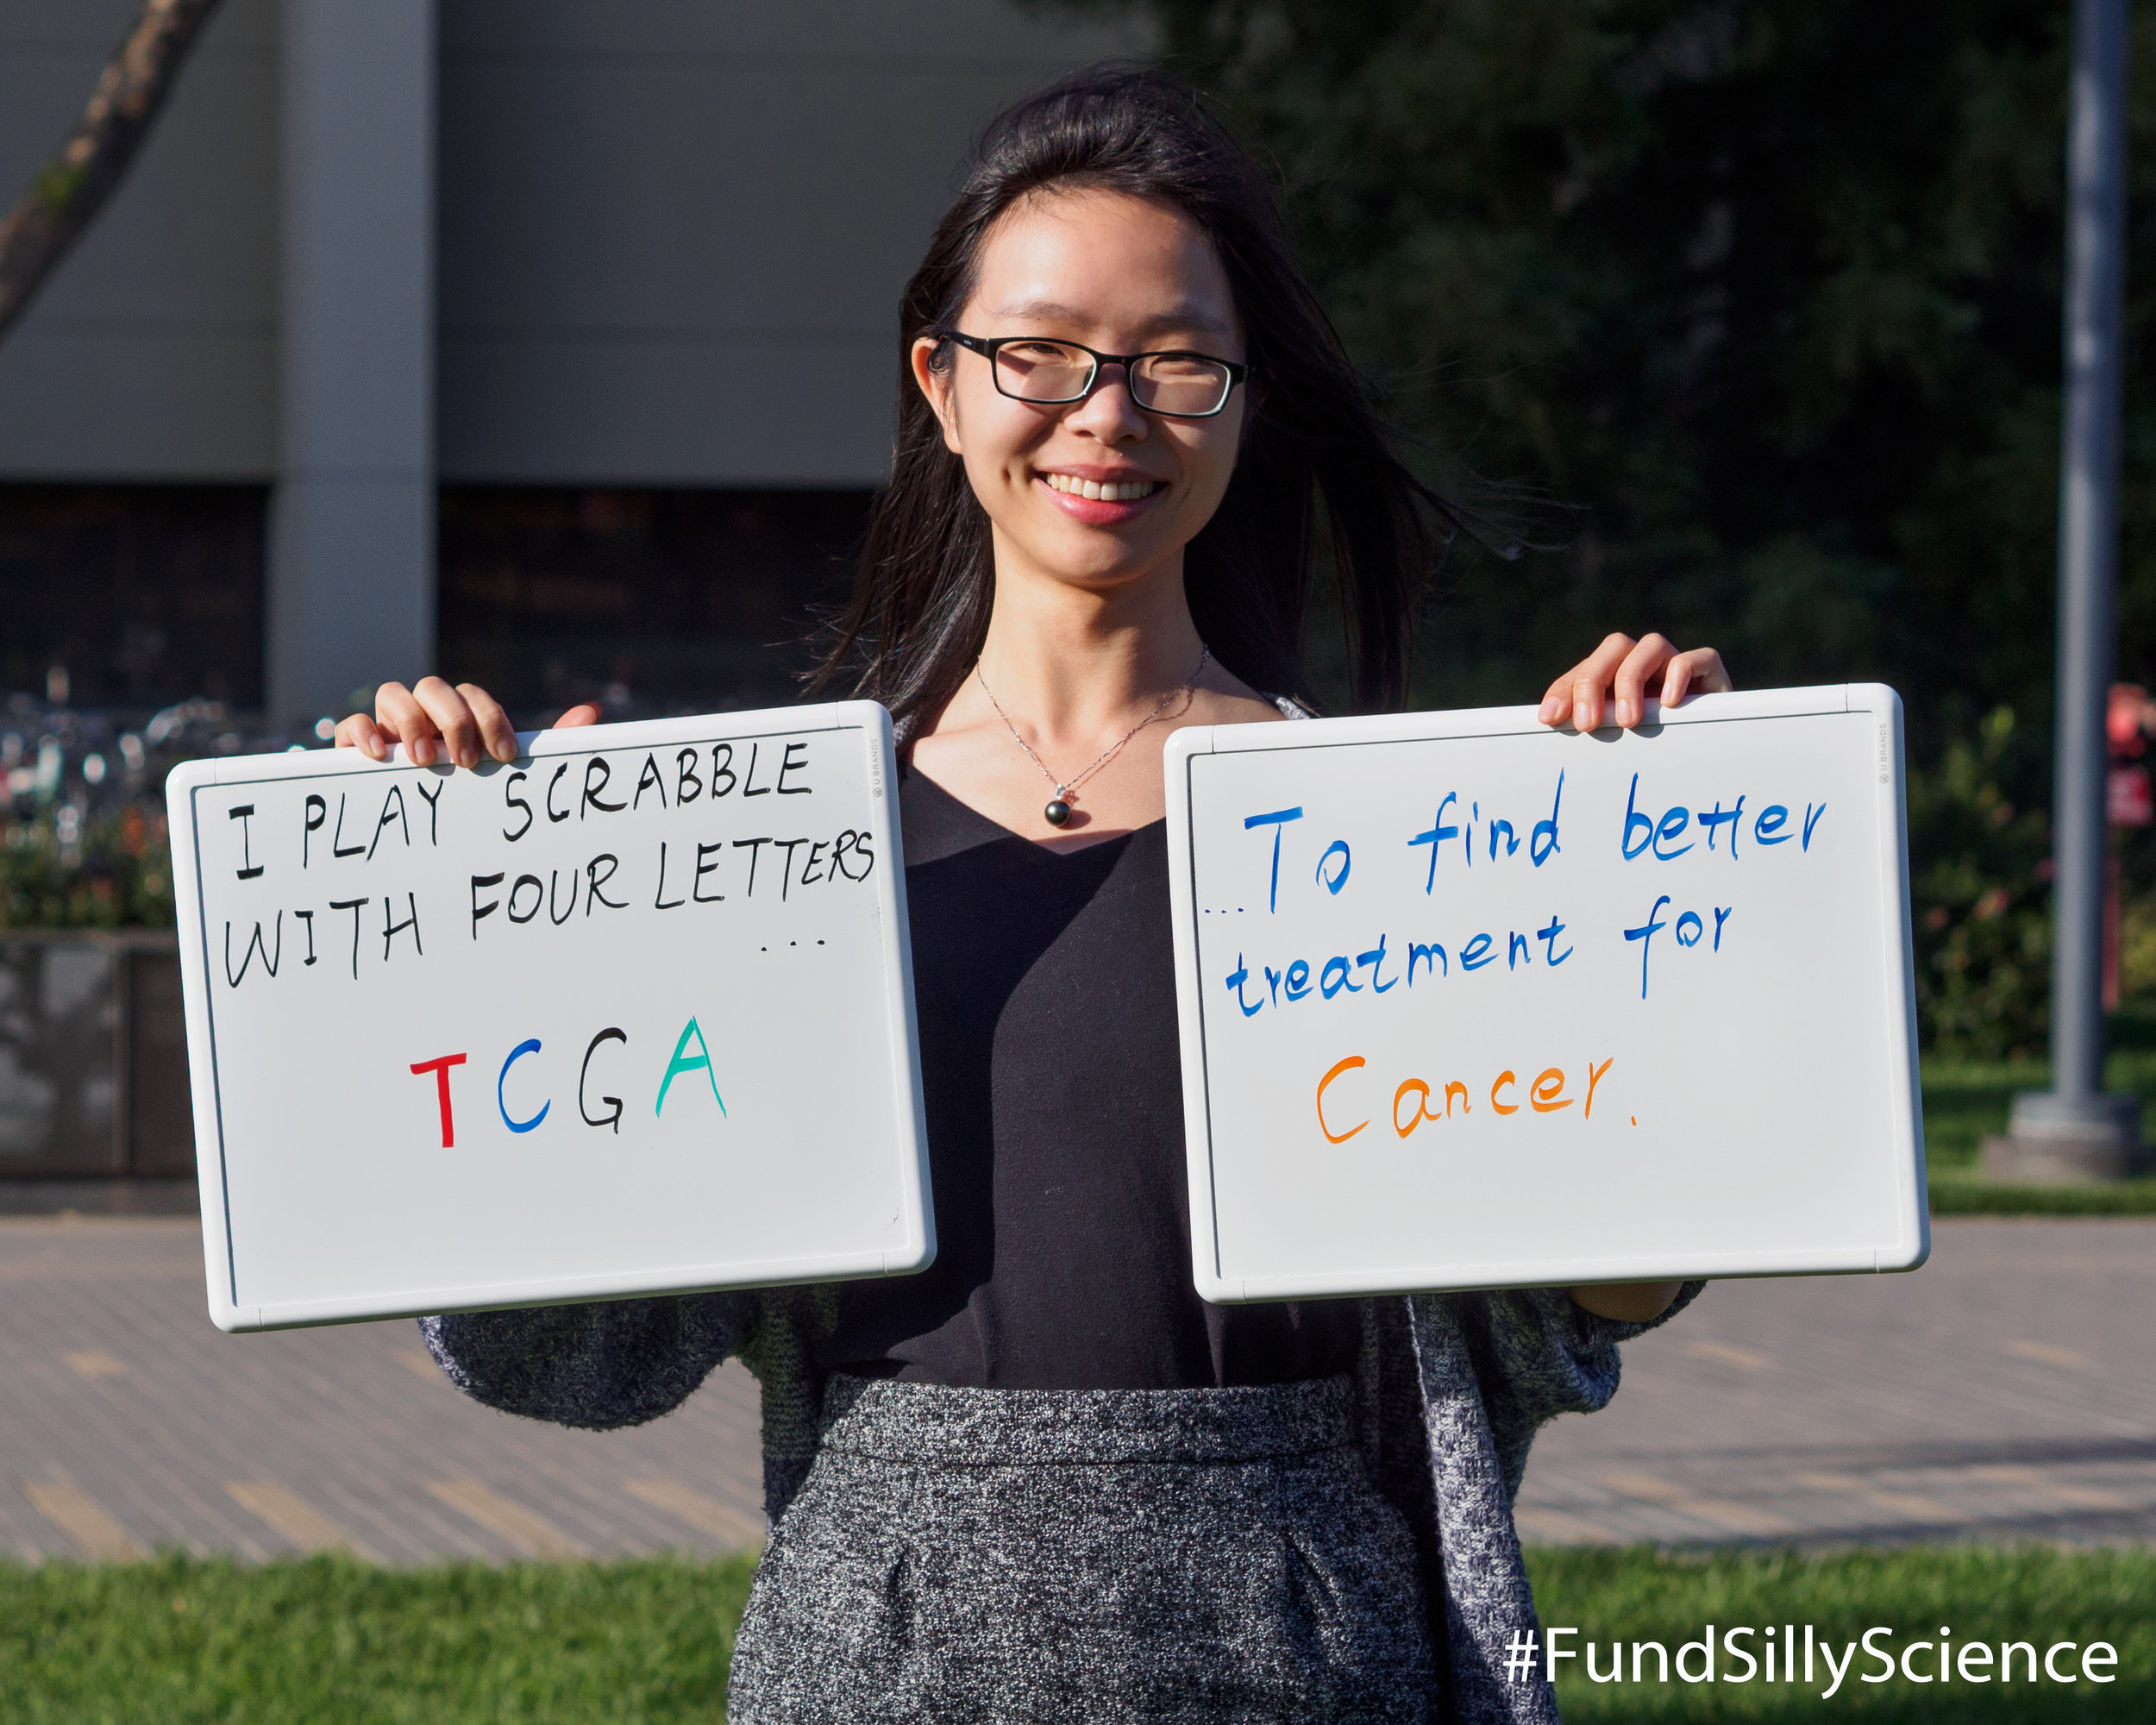  This is Hong, a postdoc at Stanford. “I analyze genomic profiles of cancers to find the culprits underlying tumor growth.” 